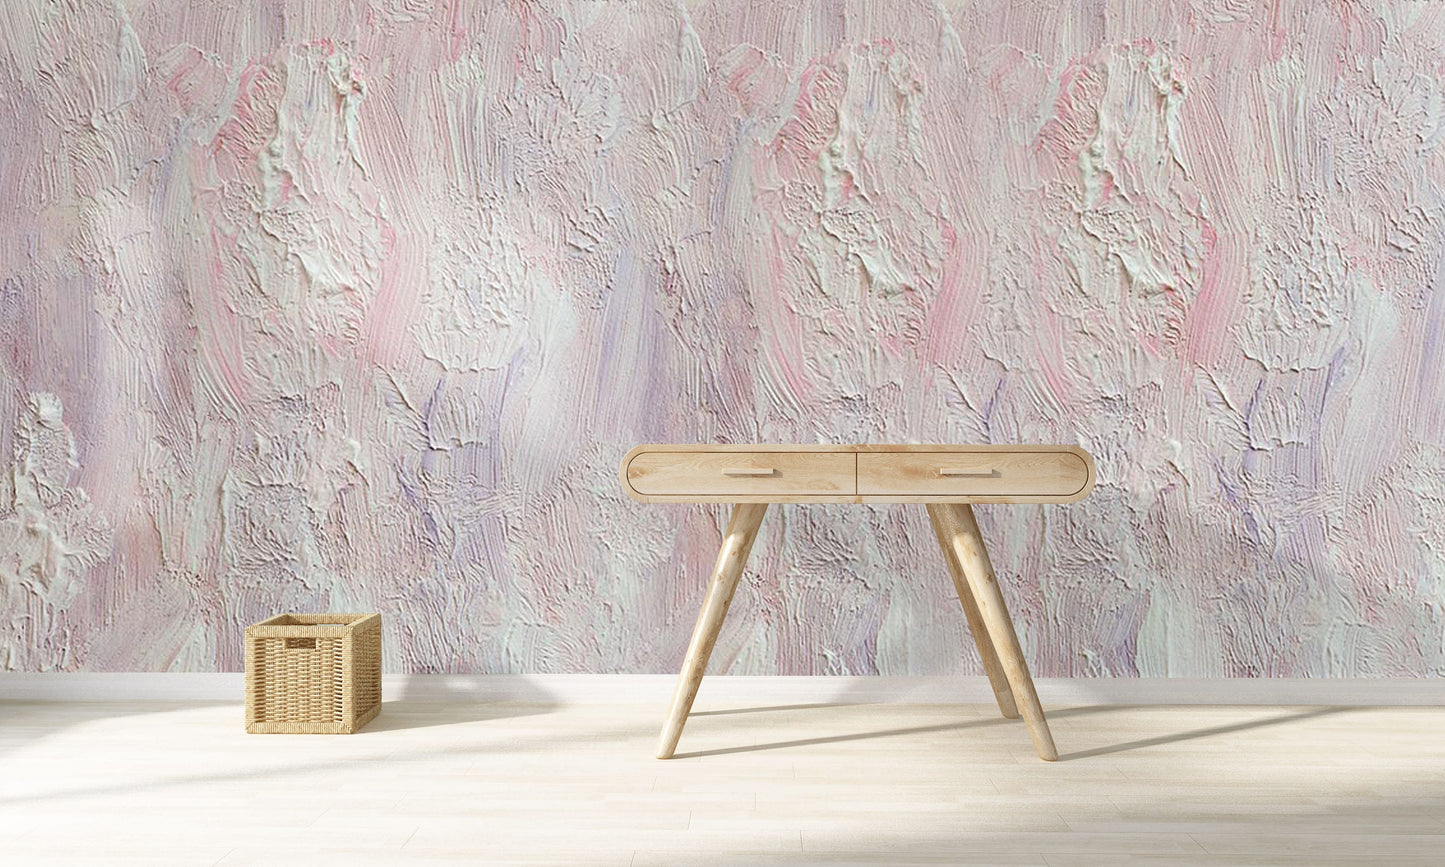 Wallpaper mural with a light purple oil painting for use as a Hallway Decoration